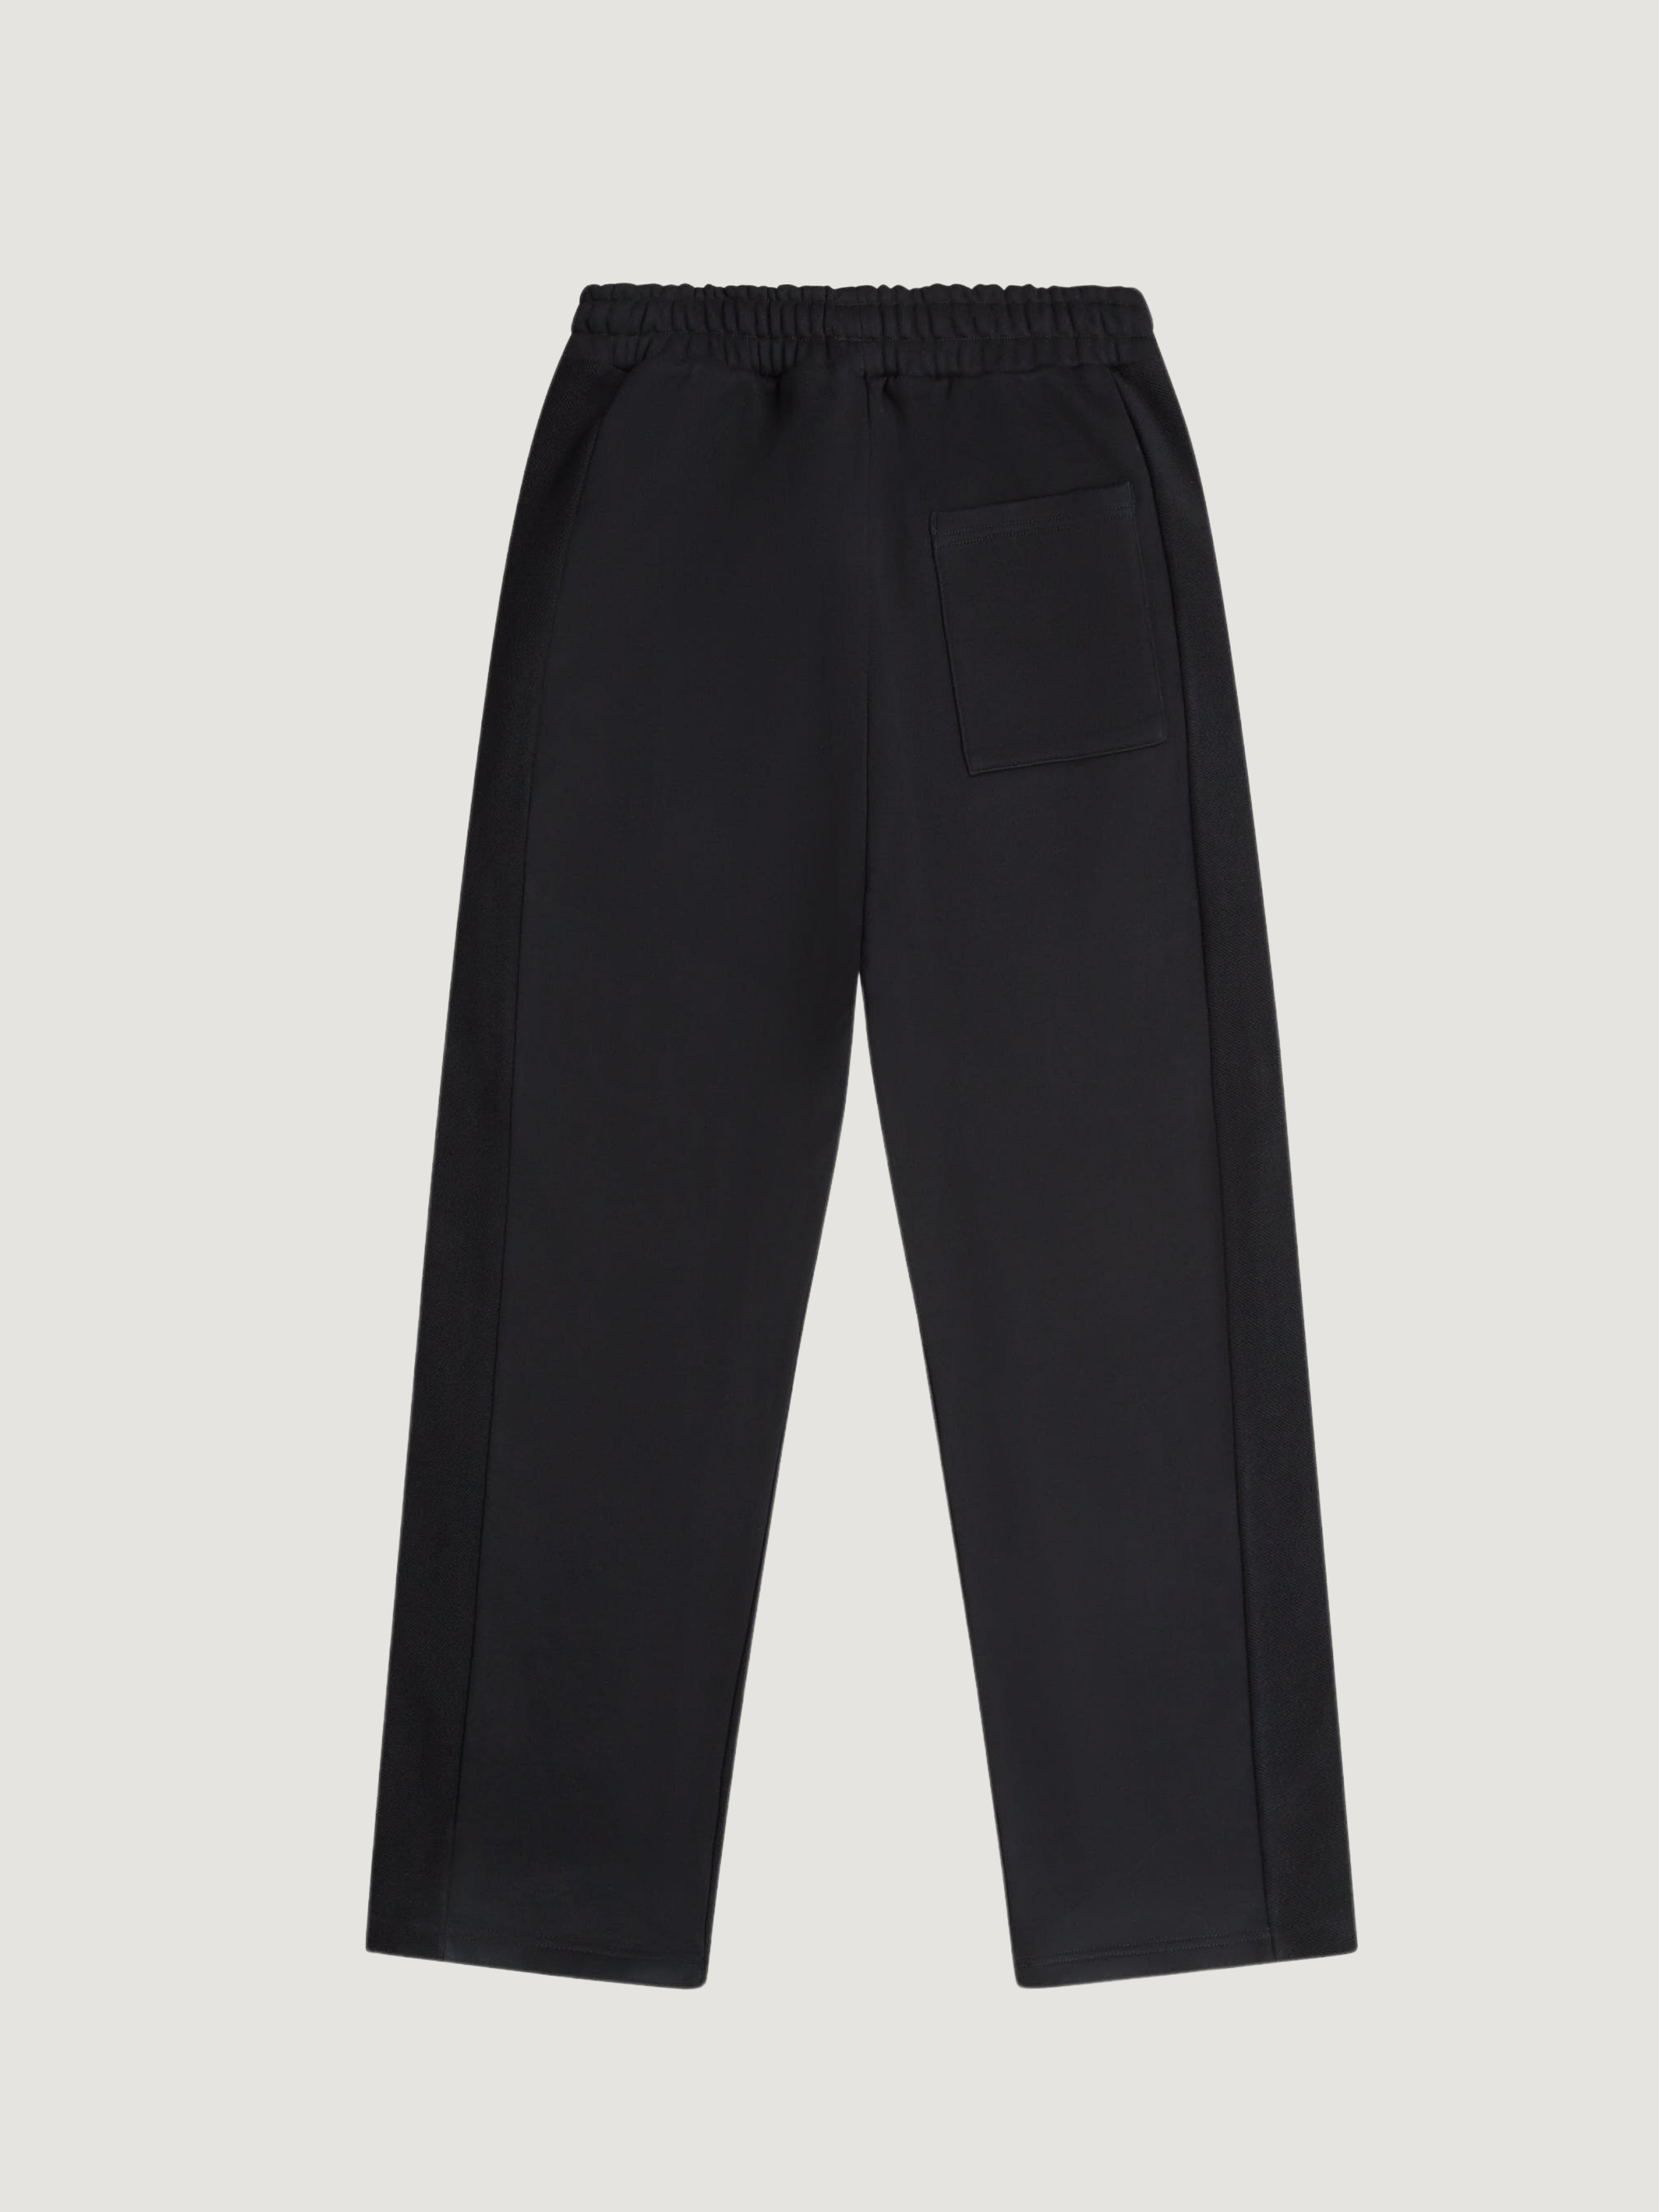 INSIDE OUT SWEATPANTS BLACK - ATTODE